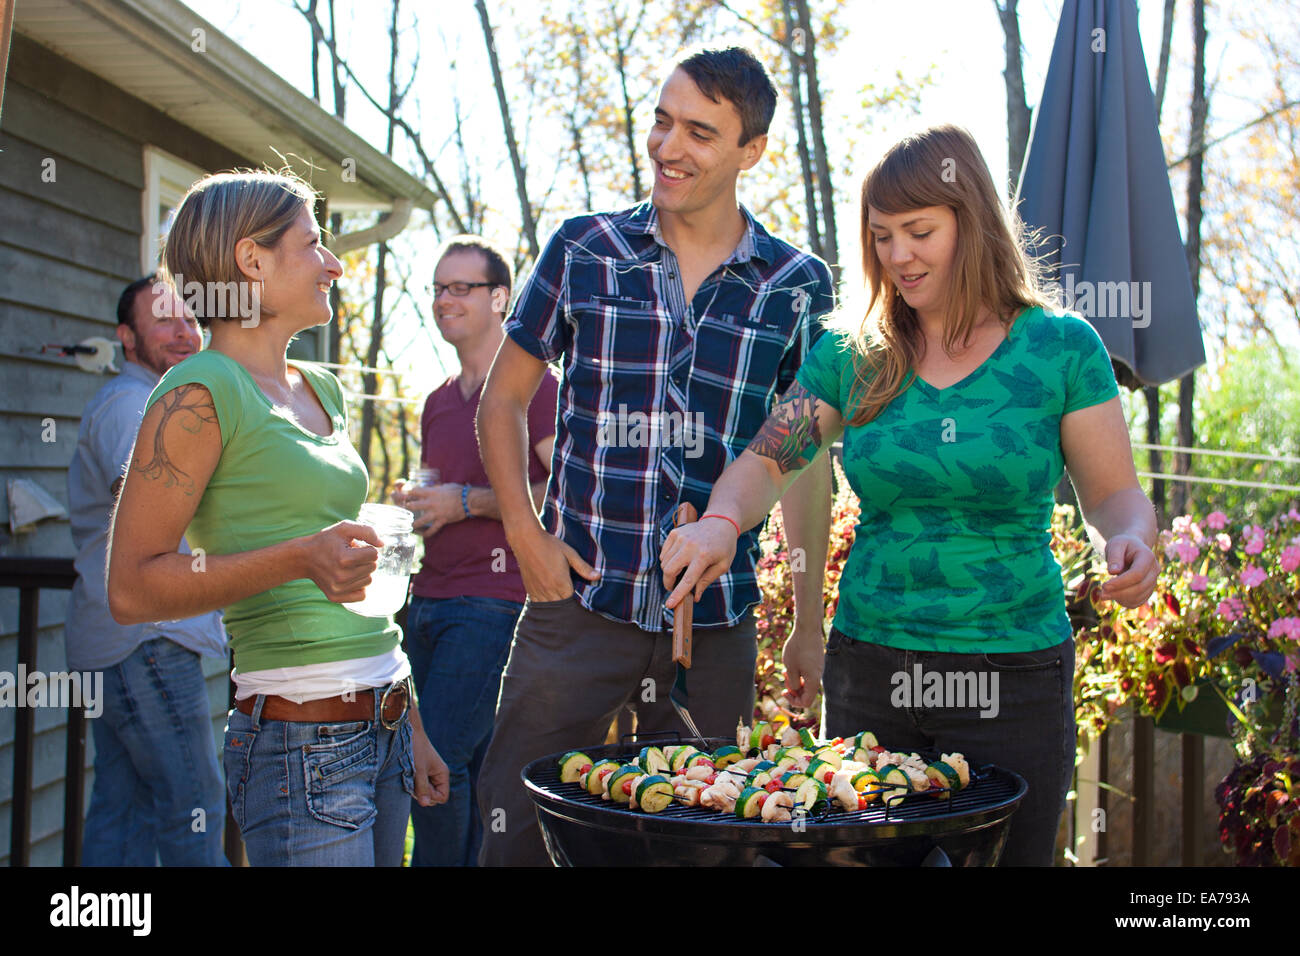 Five people standing by barbecue grill in backyard Stock Photo